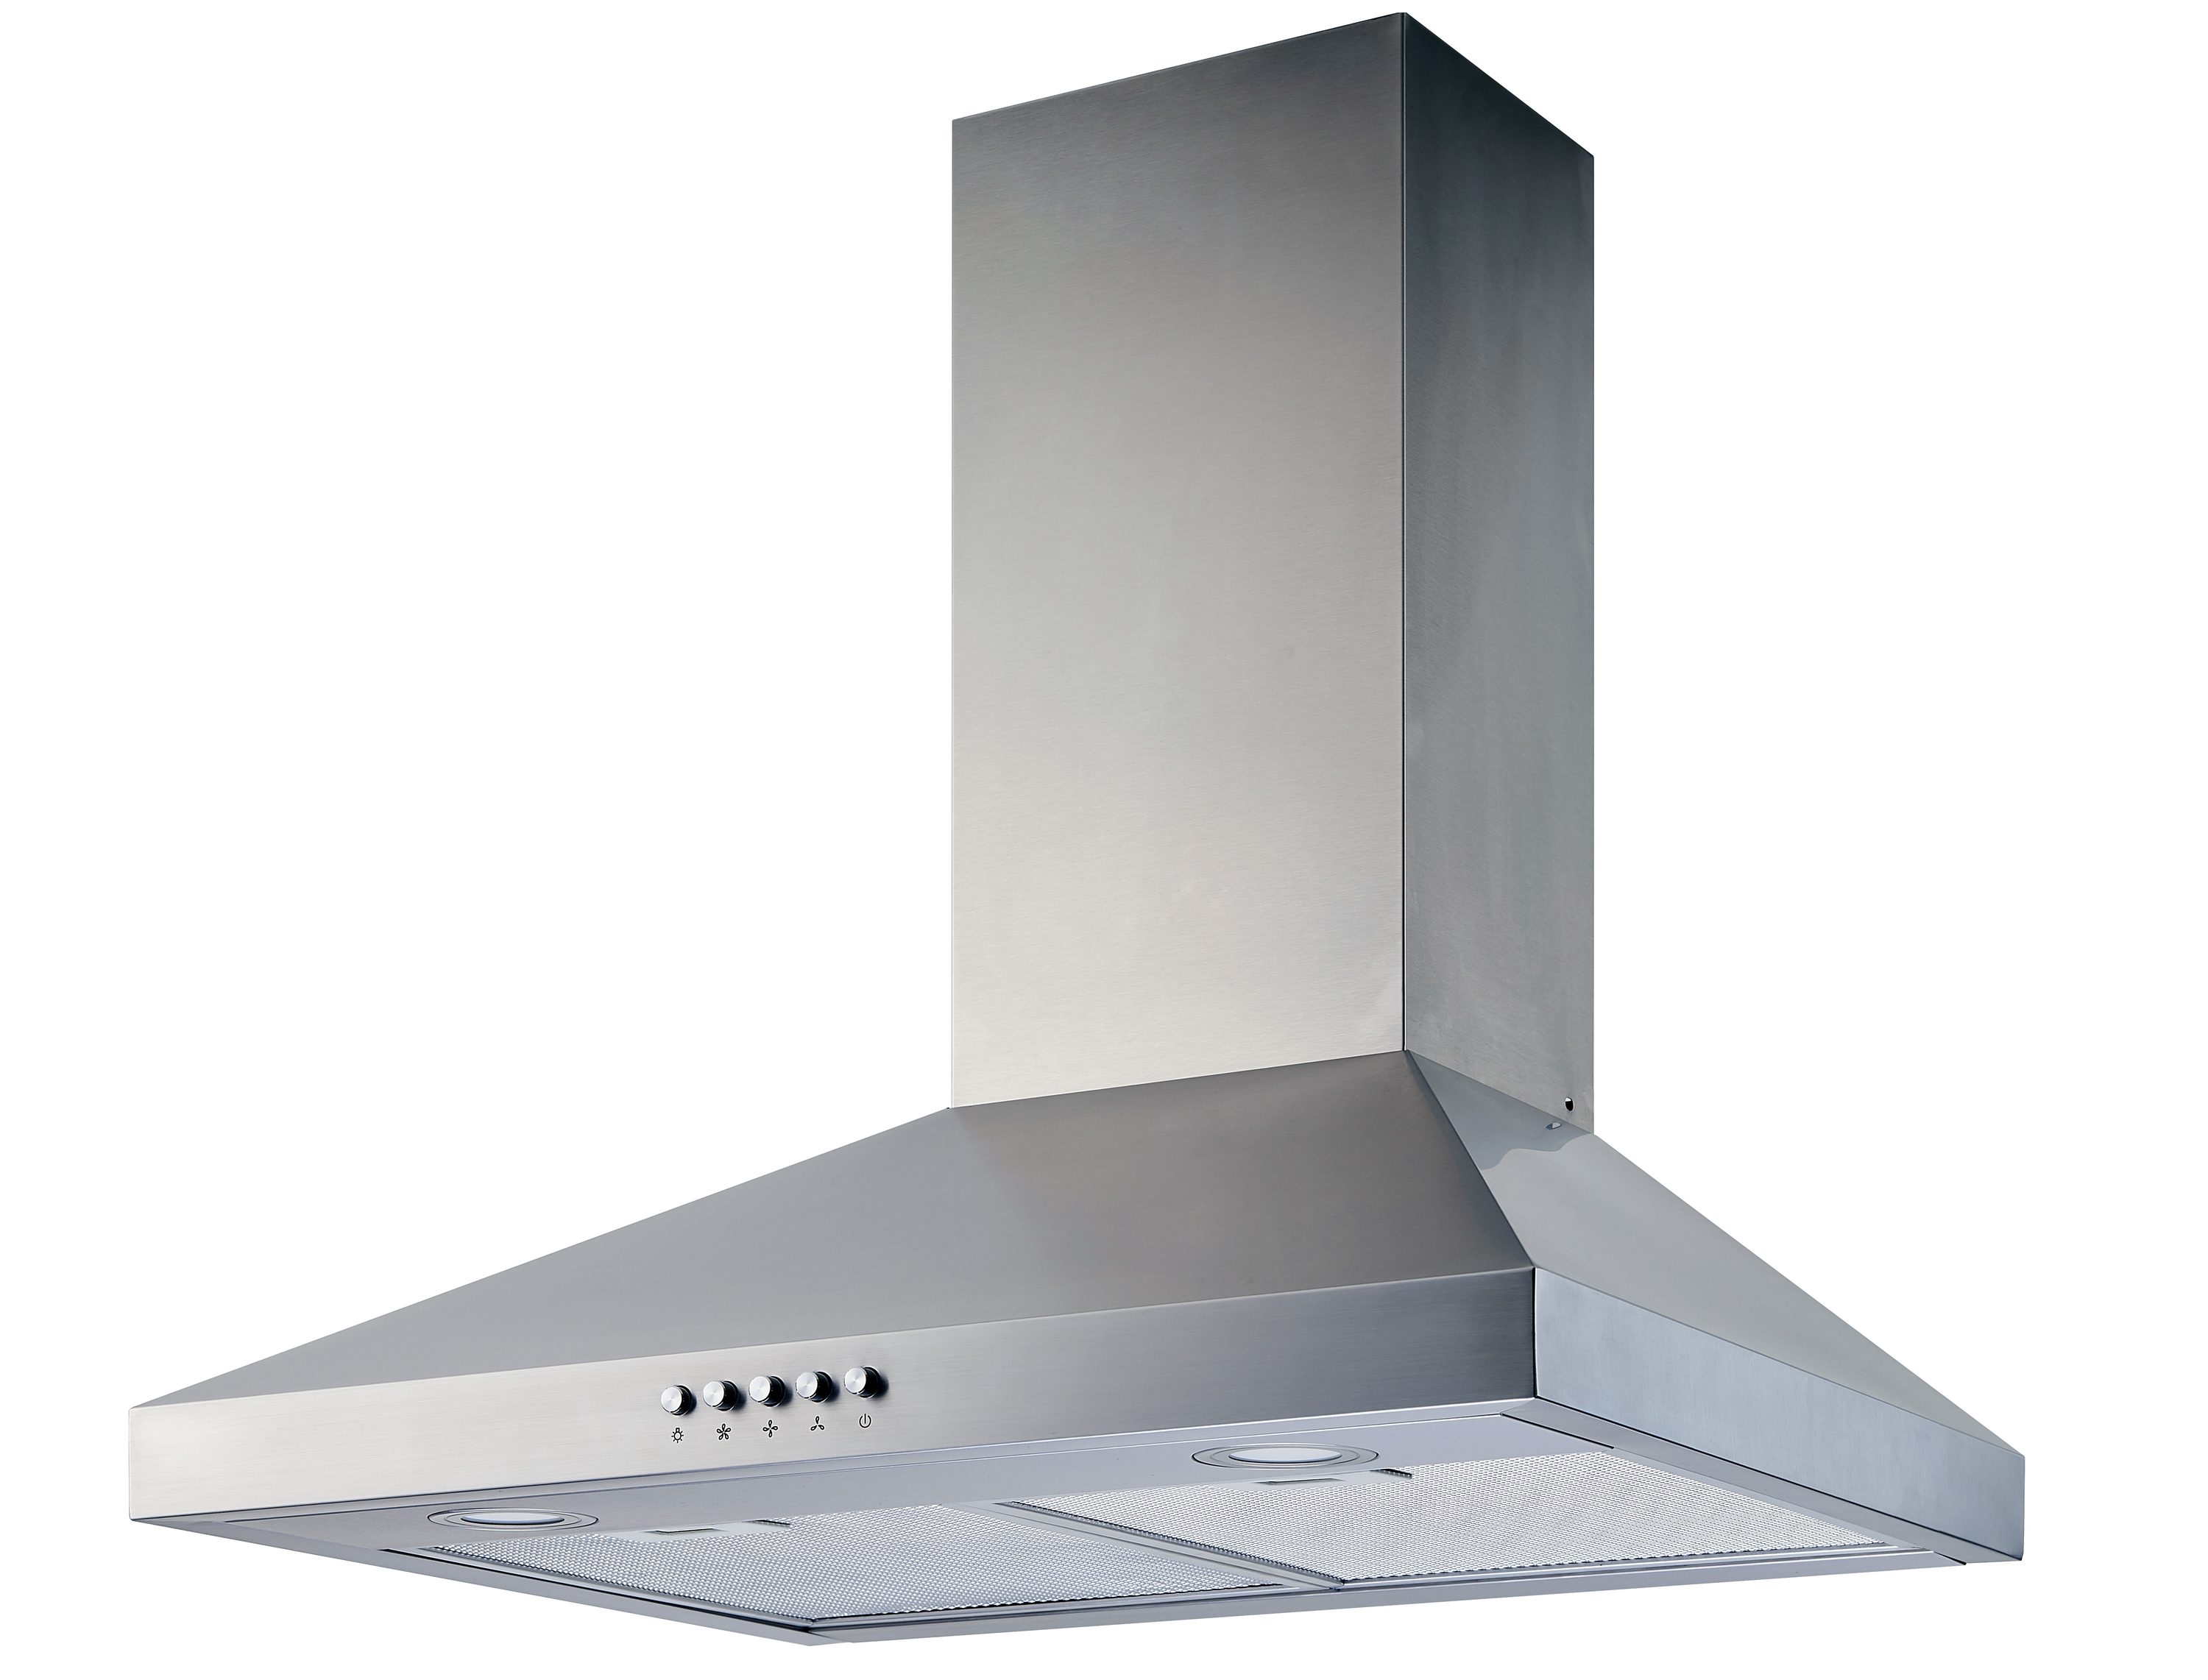 DKB 30 Inch Wall Mounted Range Hood Brushed Stainless Steel With Halo